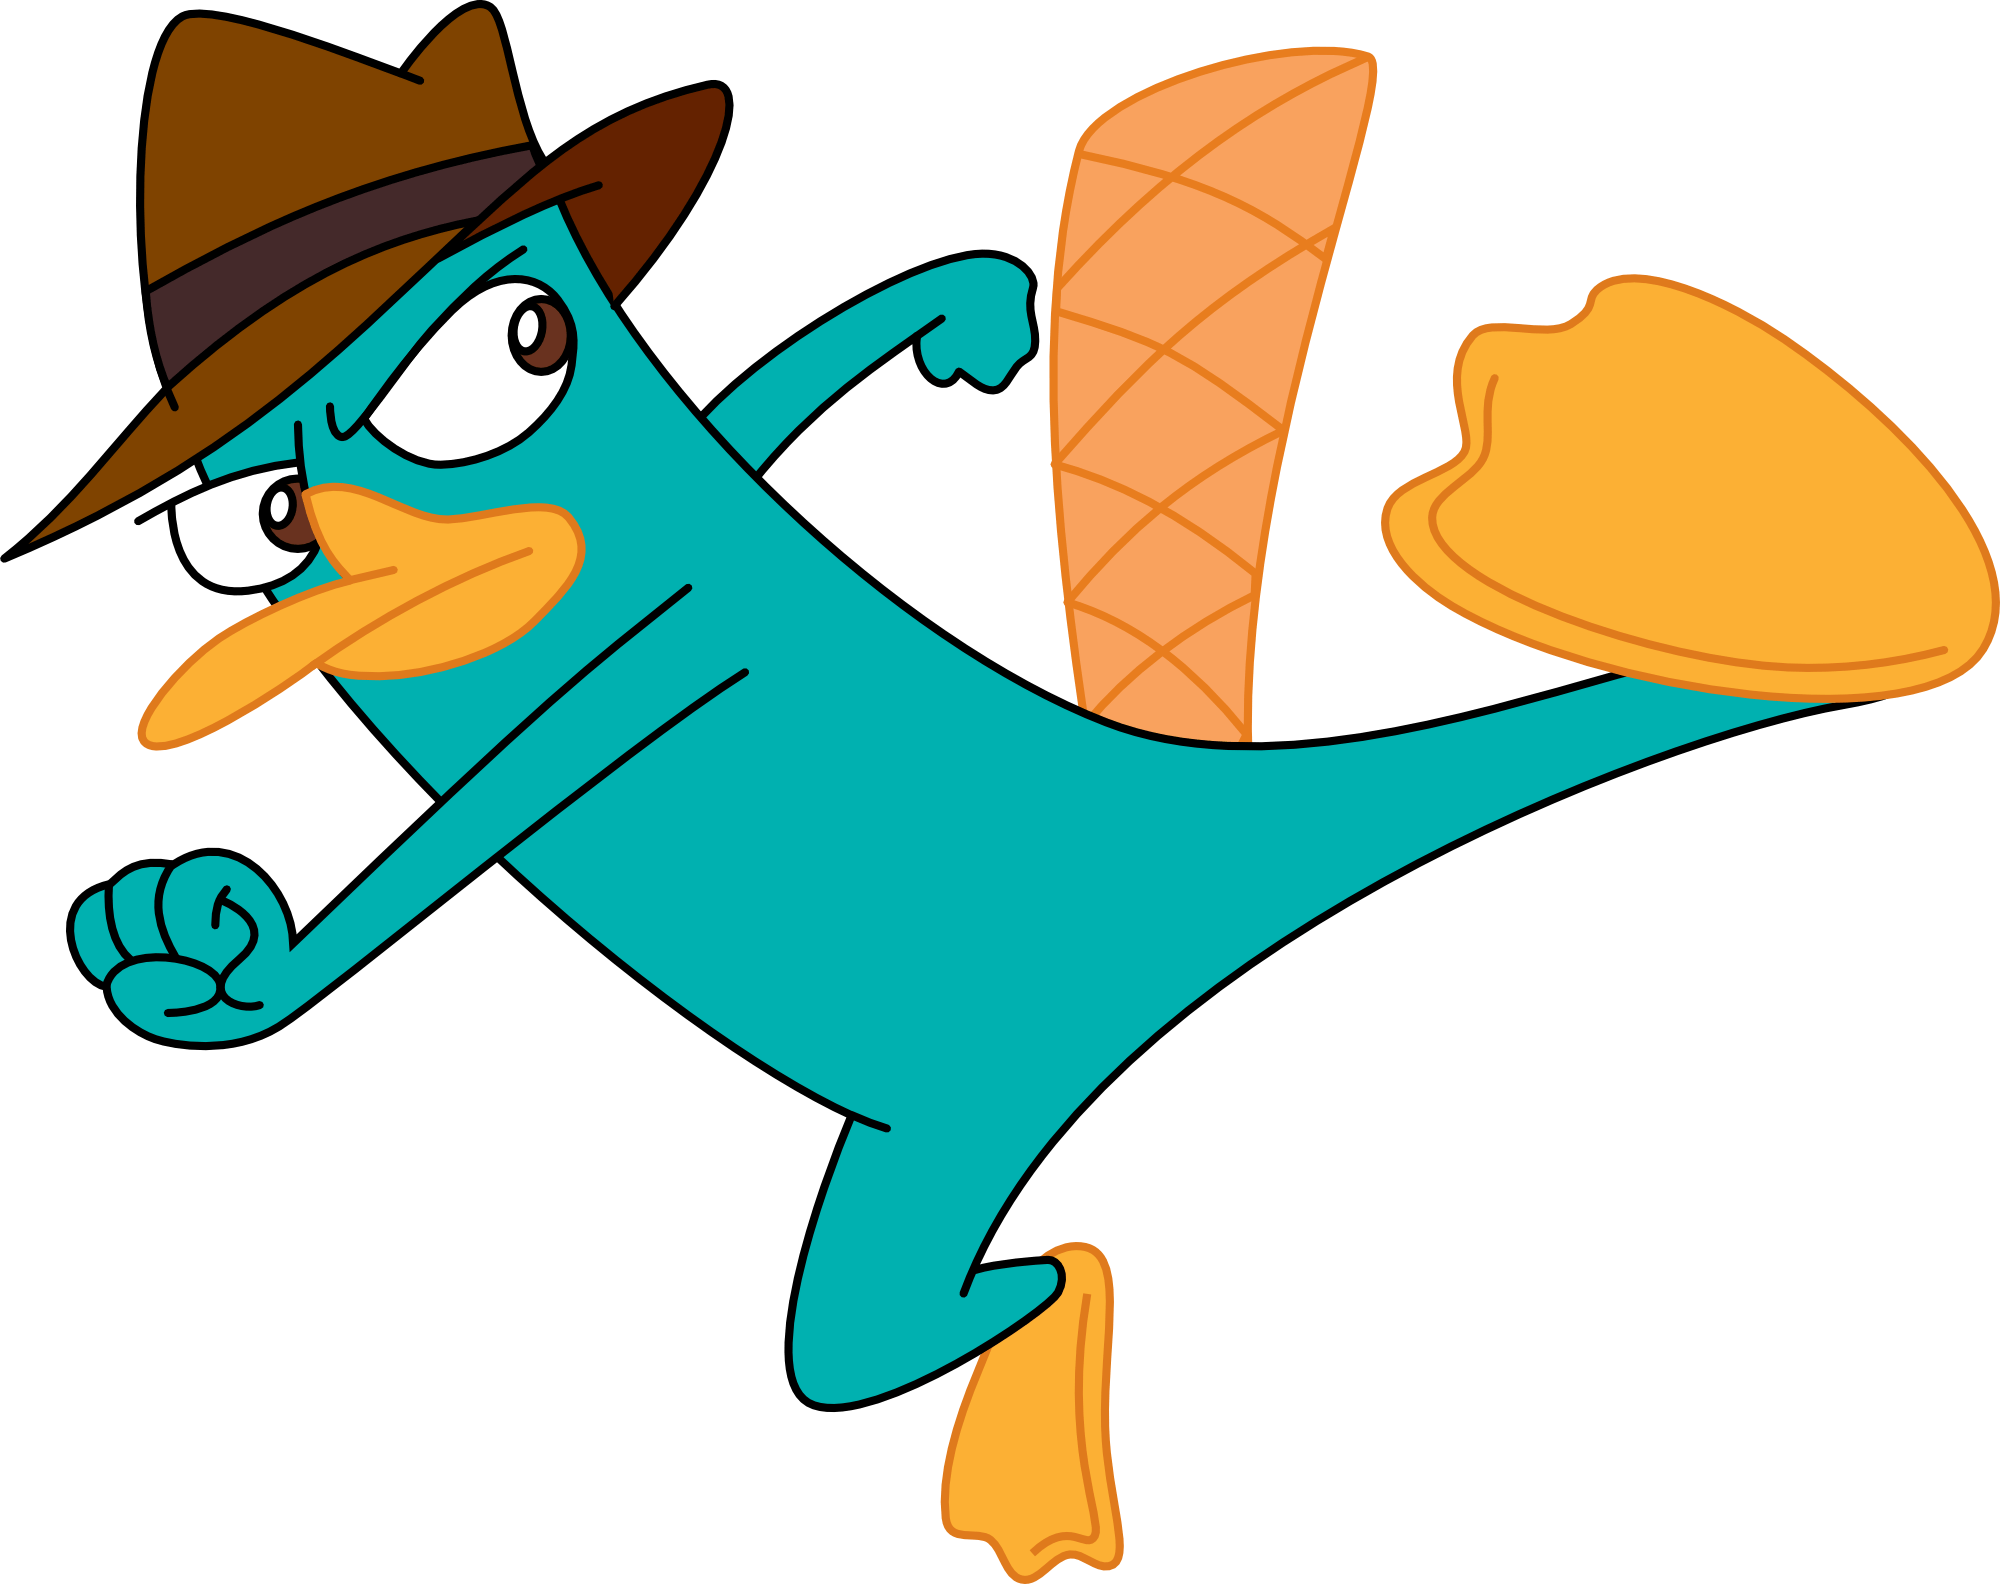 perry the platypus